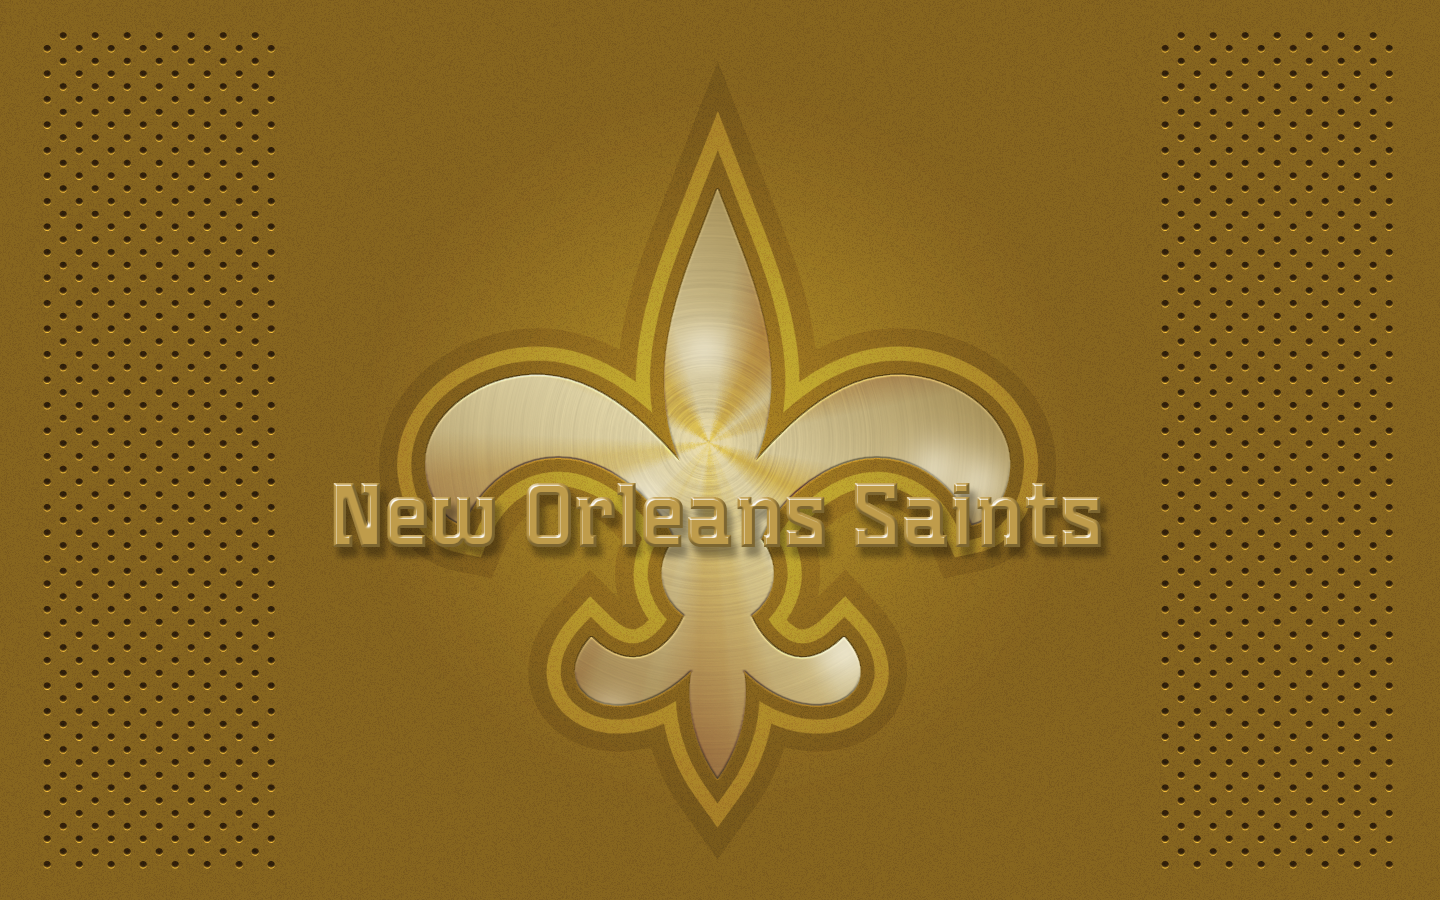 Hope You Like This New Orleans Saints Wallpaper HD Background As Much